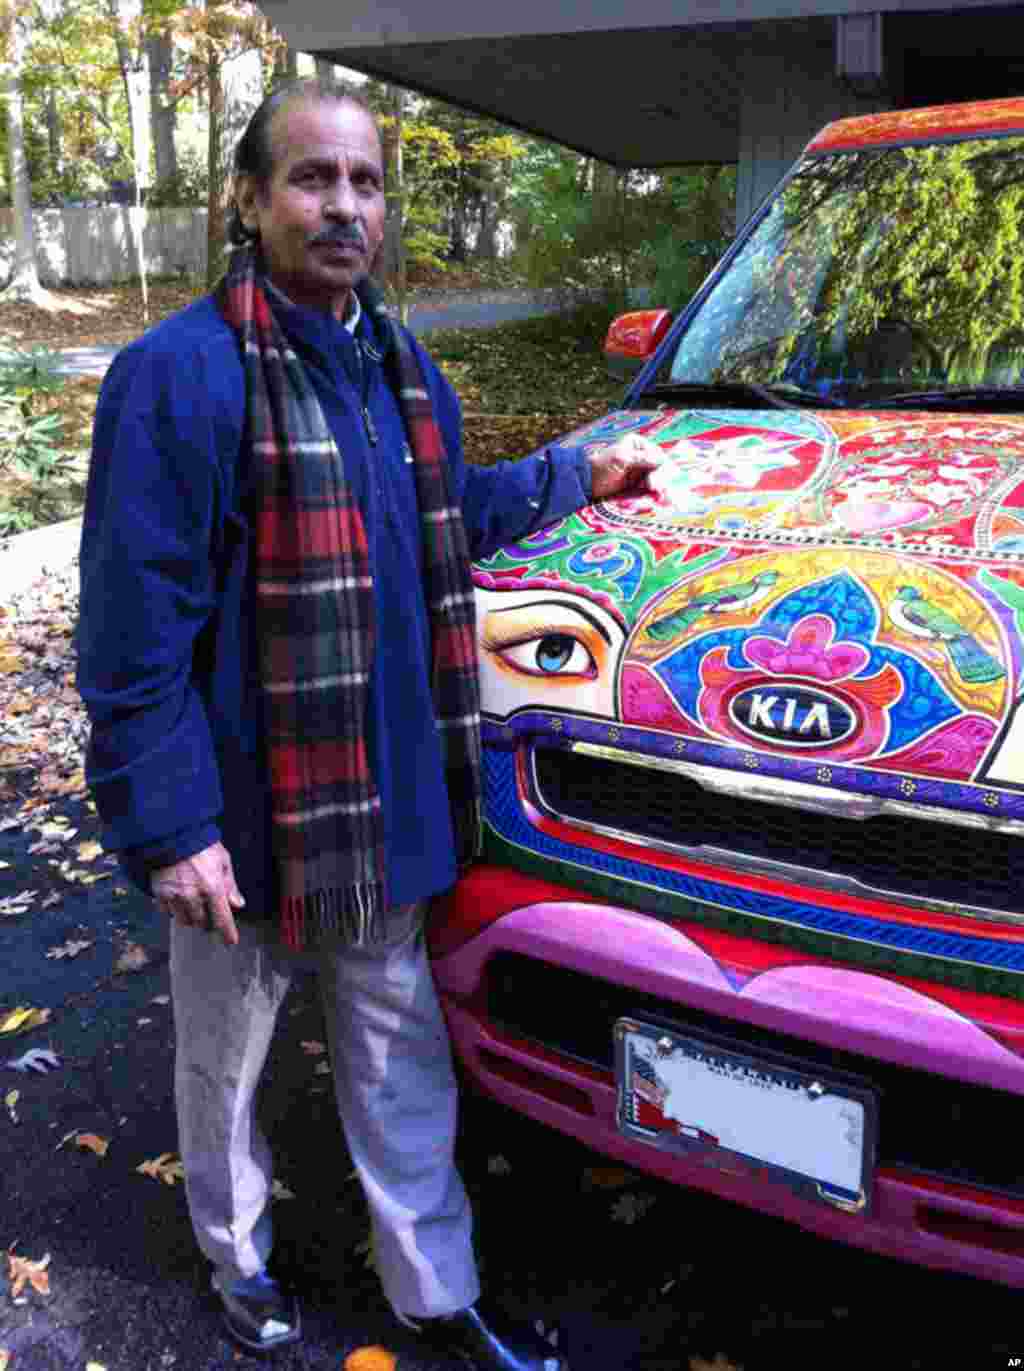 Ghulam Sarwar stands next to a Kia Sorento he painted. The Pakistan native has been in the U.S. for several months and has painted several cars in the colorful style of Pakistani trucks and buses. (VOA Photo/M. Hilburn)